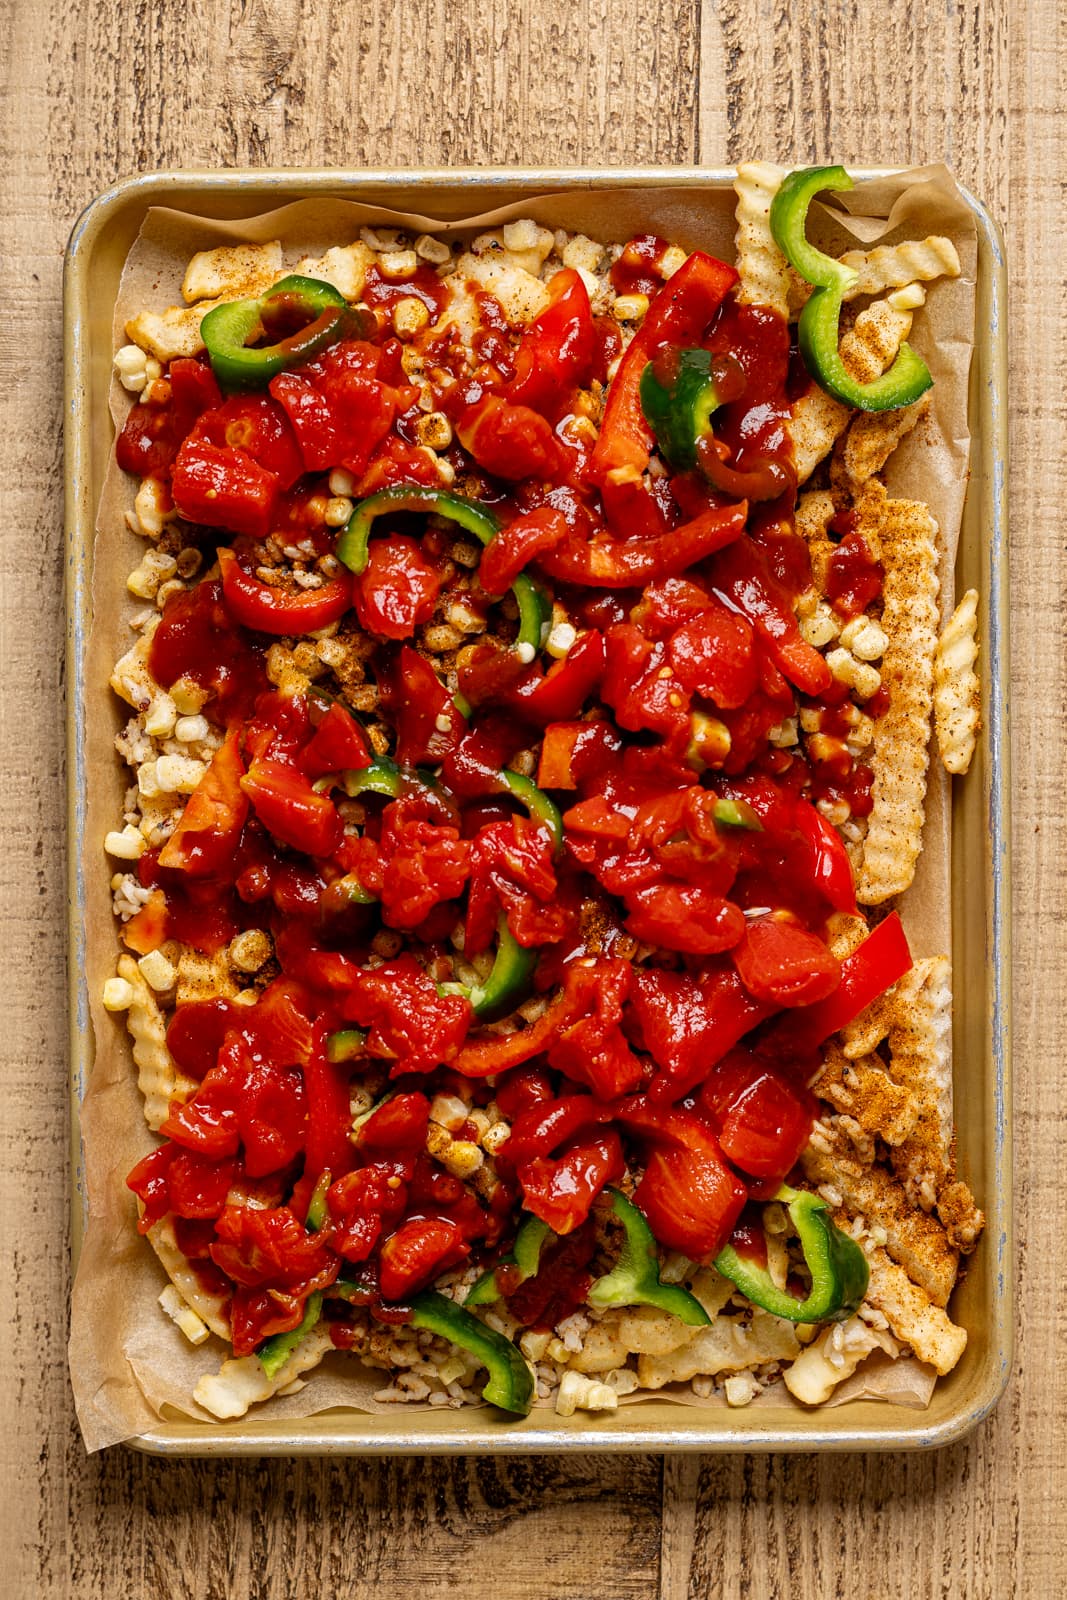 Fries on sheet pan with corn, quinoa, peppers, and diced tomatoes as topping.